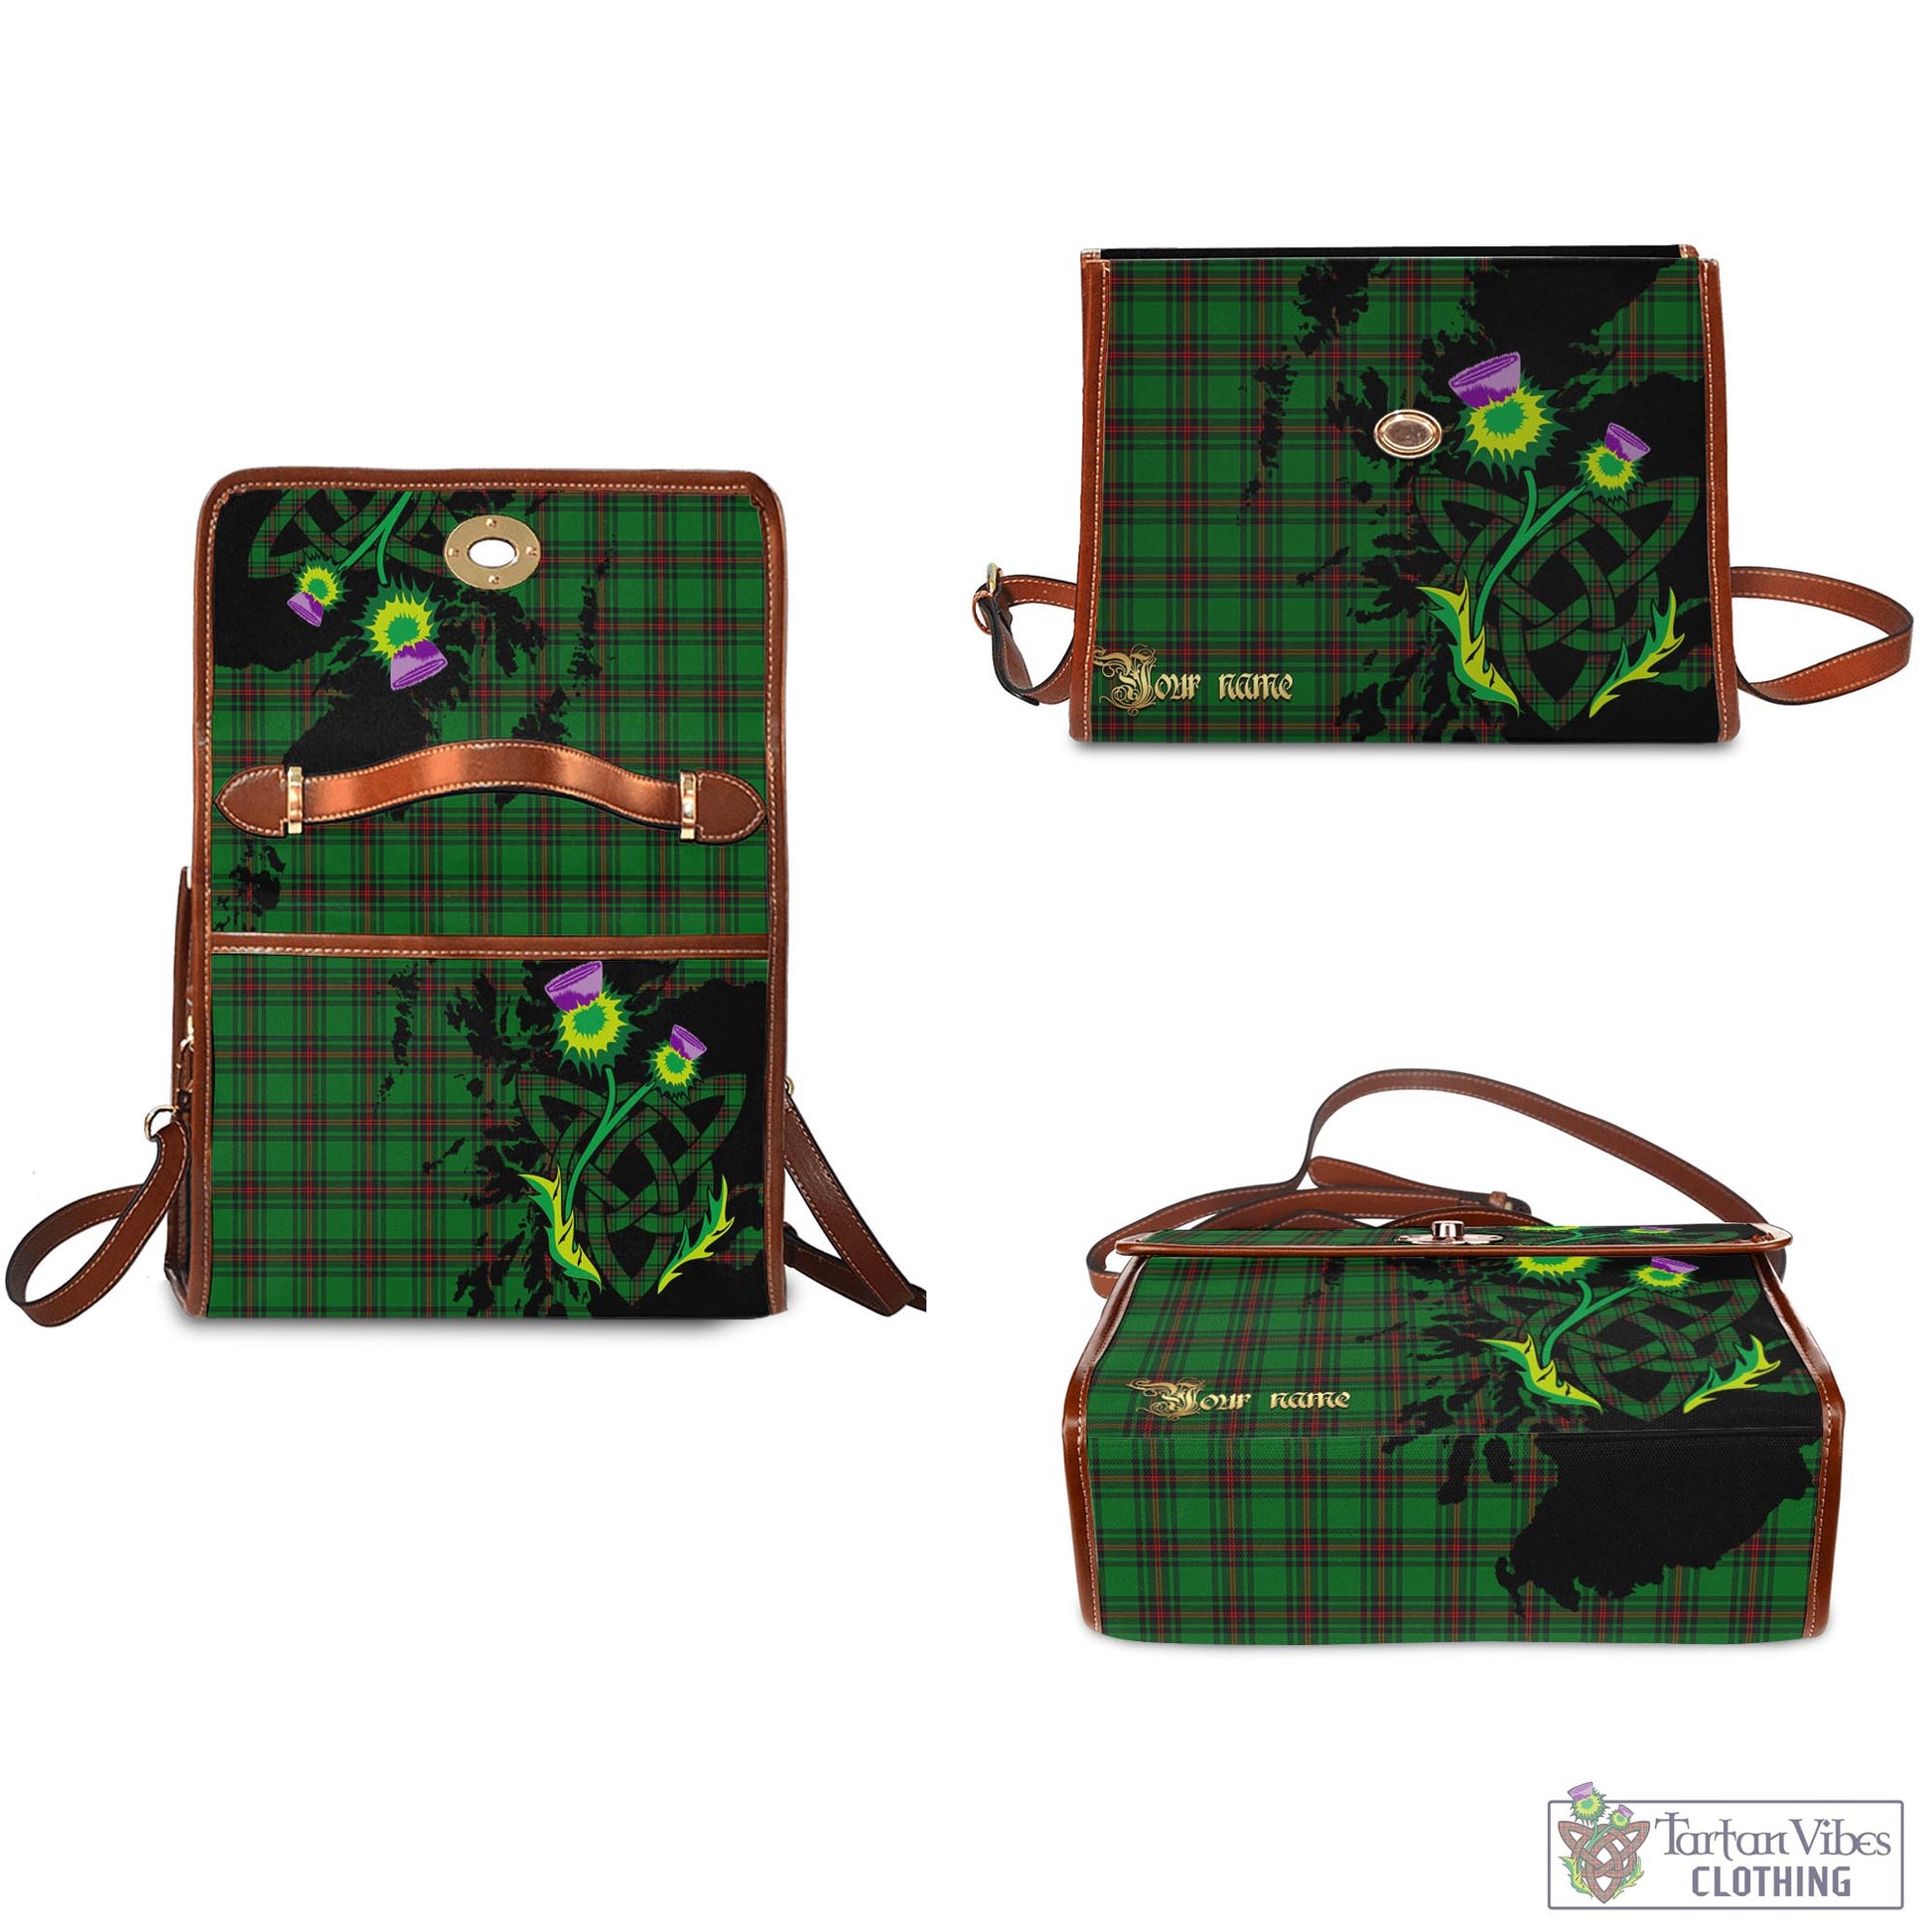 Tartan Vibes Clothing Anstruther Tartan Waterproof Canvas Bag with Scotland Map and Thistle Celtic Accents